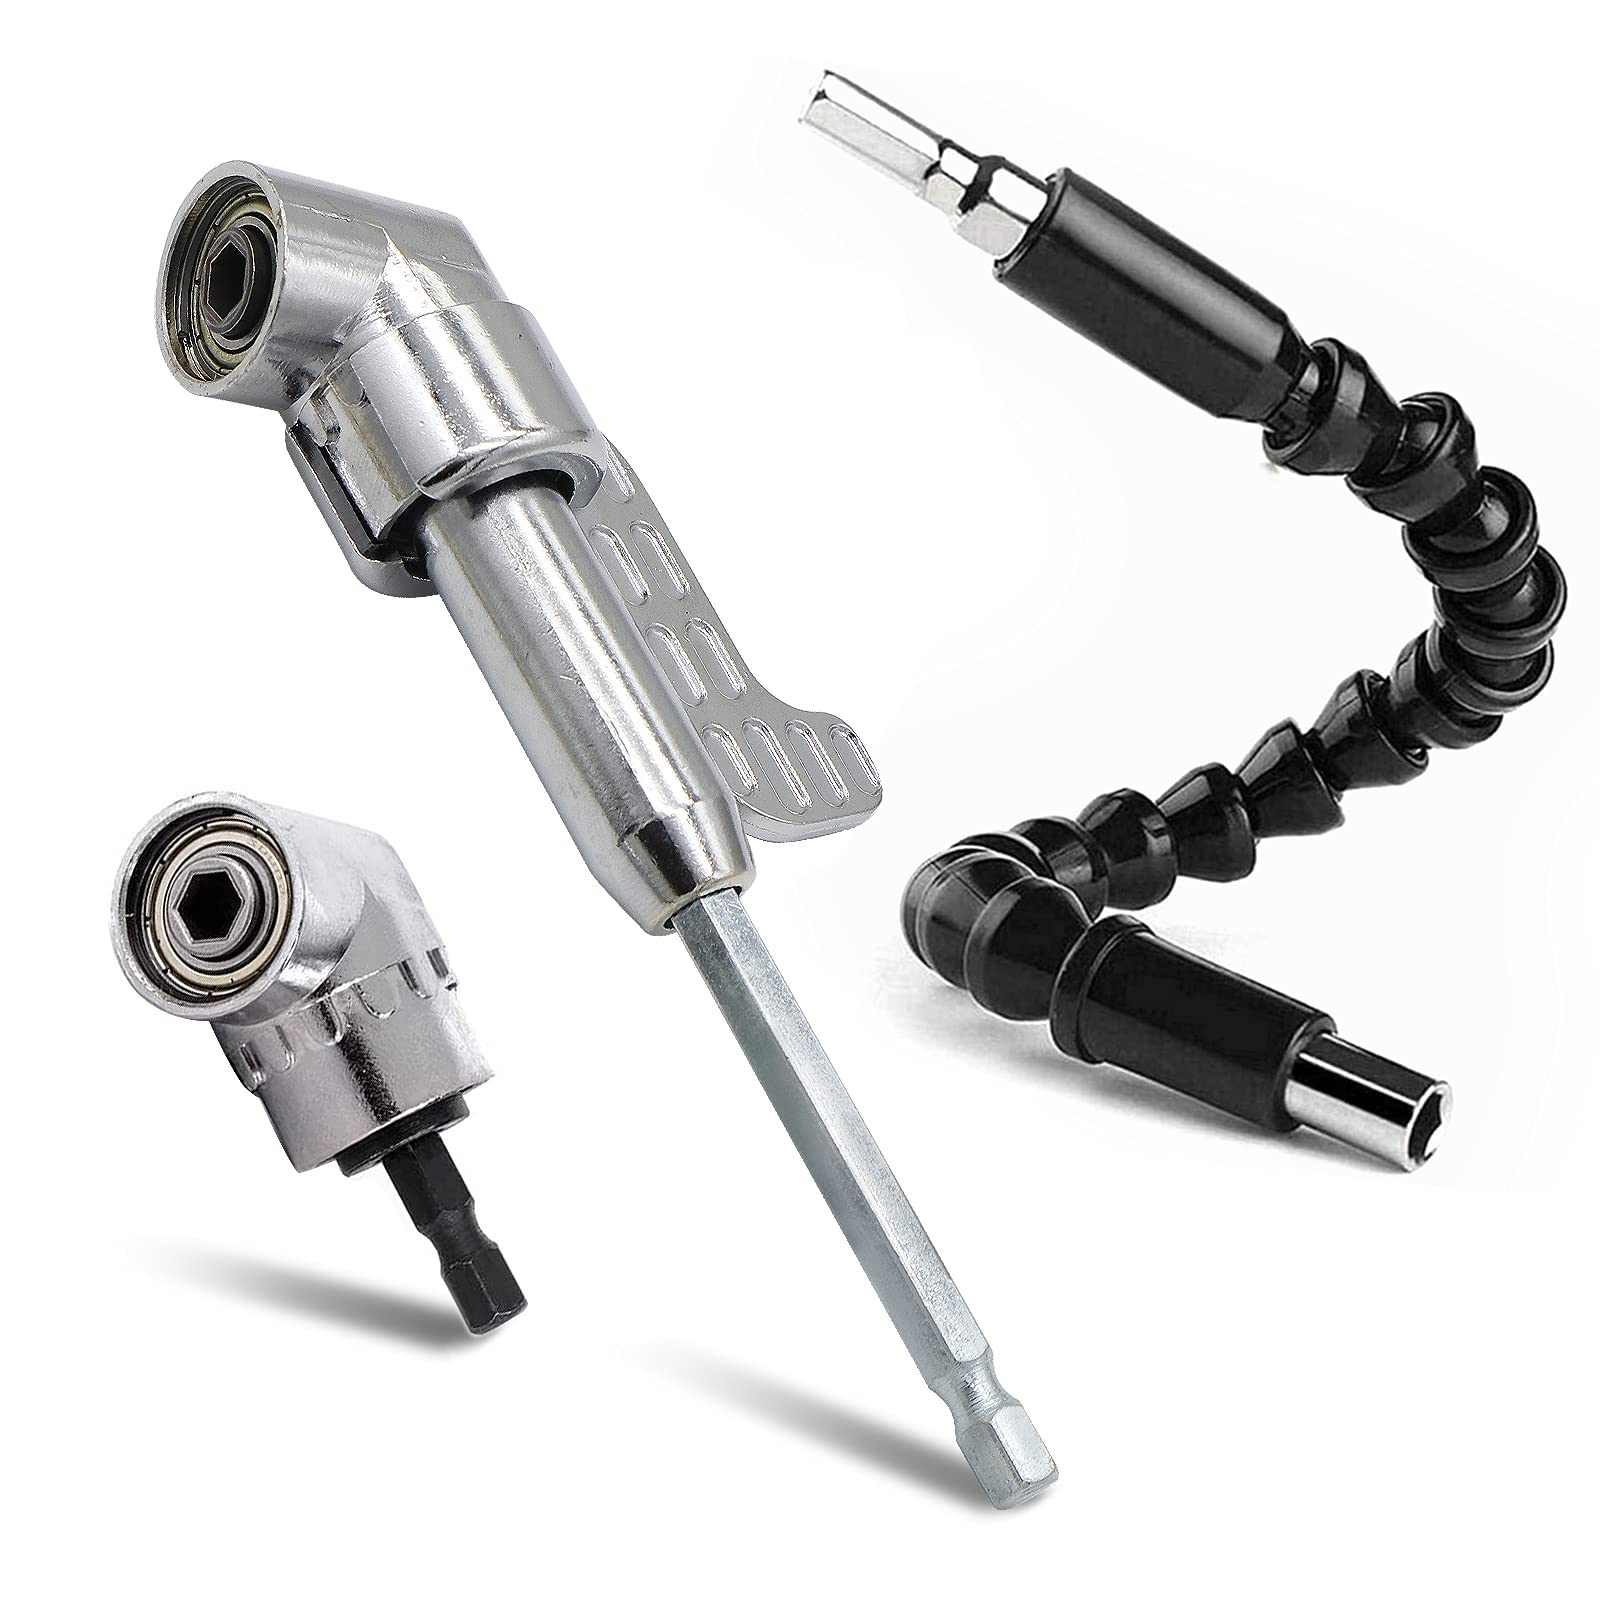 105 Degree Right Angle Driver Angle Extension Power Screwdriver Drill  Attachment with 1/4 Drive 6mm Hex Bit Magnetic Drill Bit Socket Angled Bit  Power